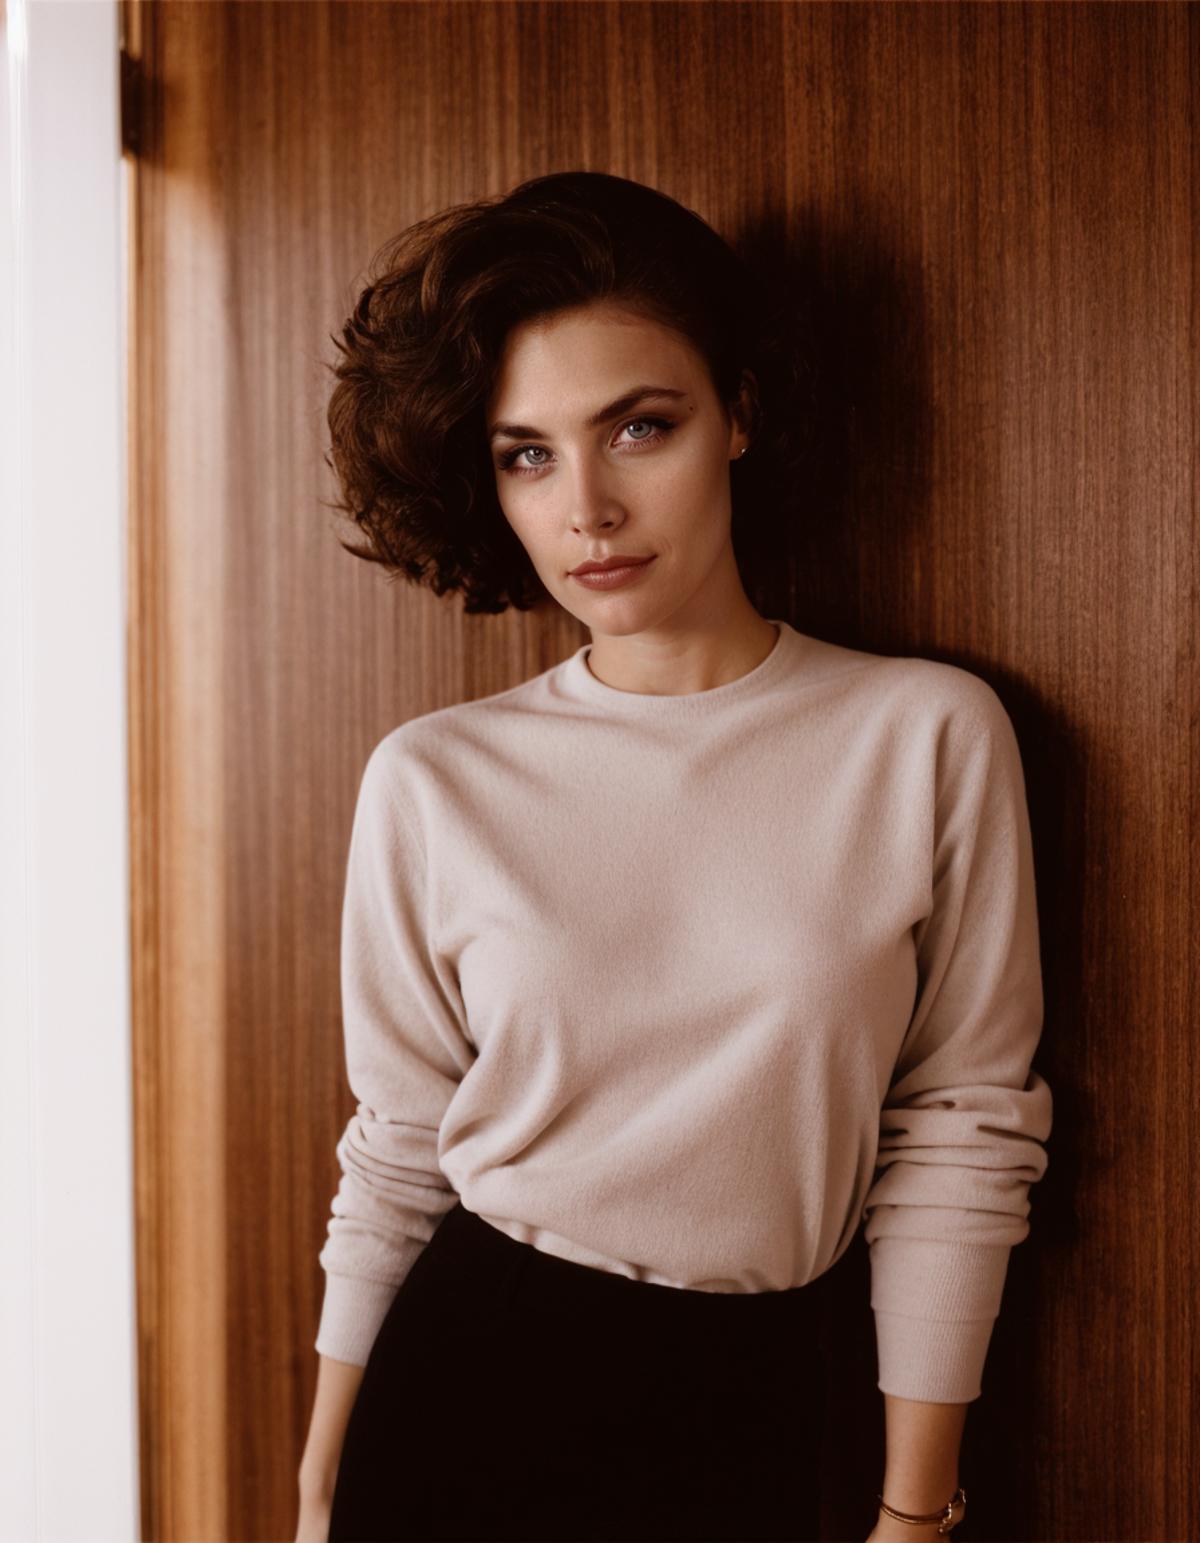 Audrey Horne (Twin Peaks) image by Menshiki